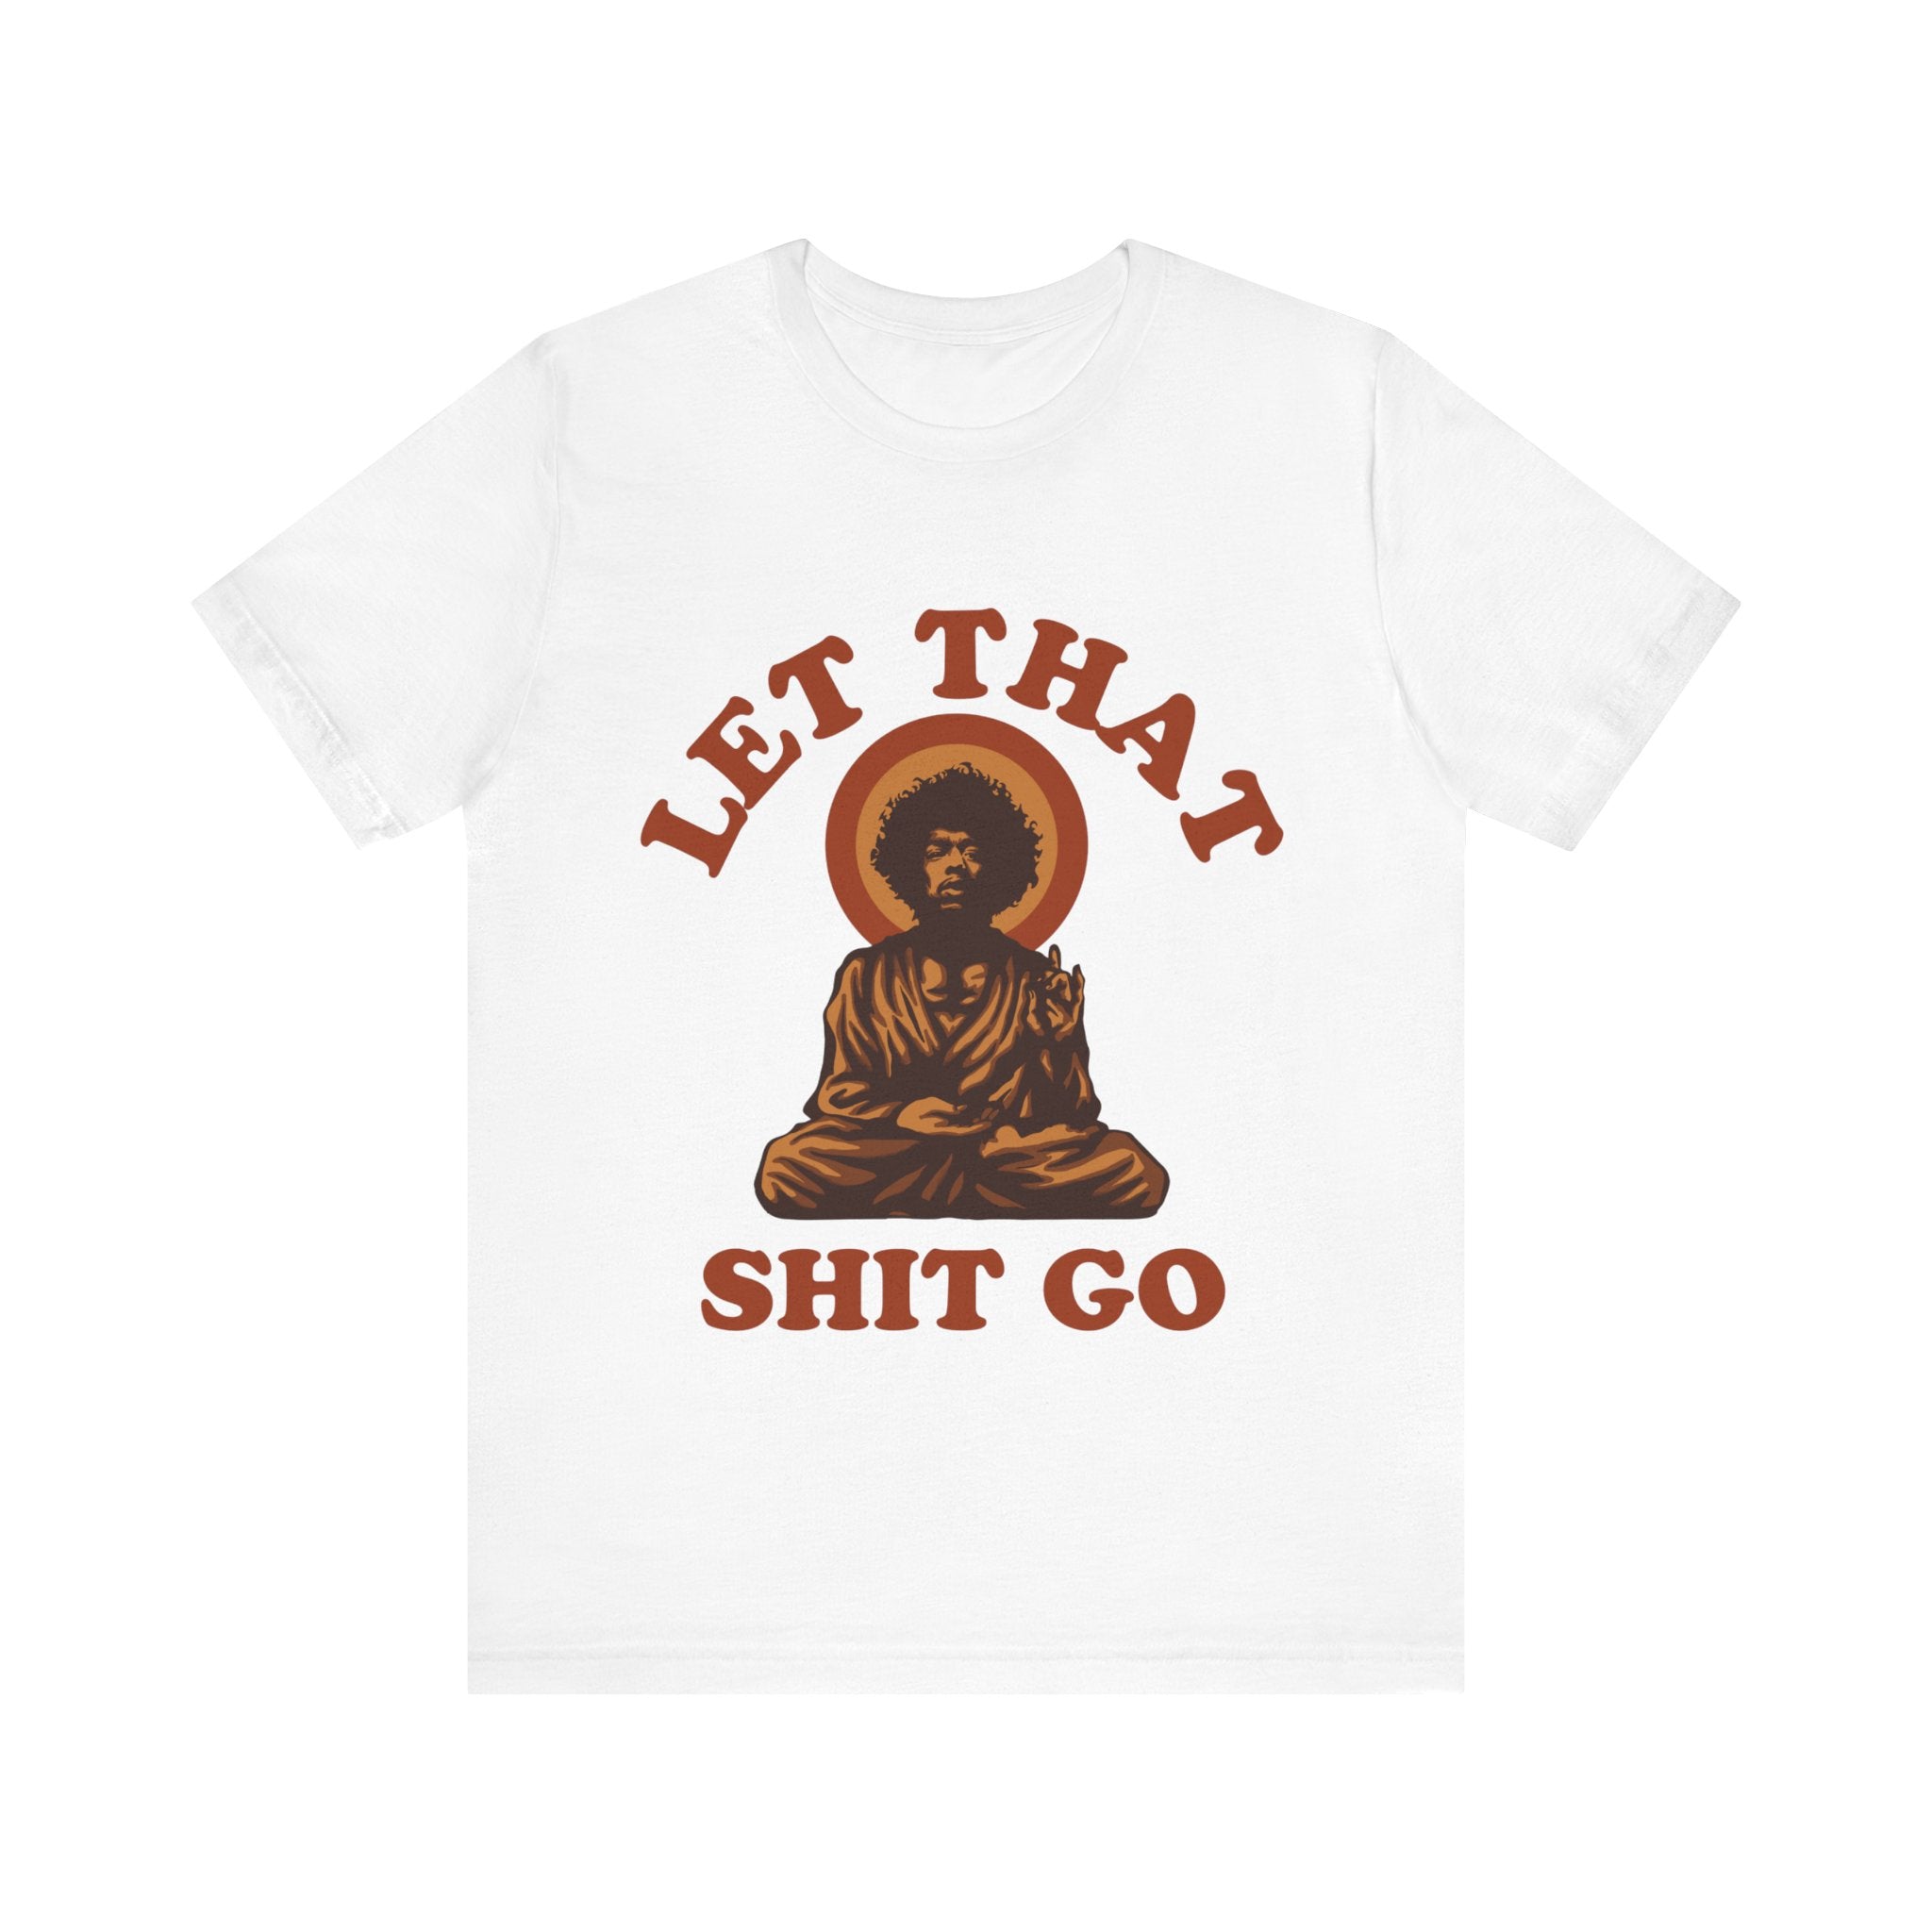 Let That Shit Go T-Shirt featuring a graphic of a meditating buddha surrounded by an orange aura with the phrase "Let That Shit Go" below in red.